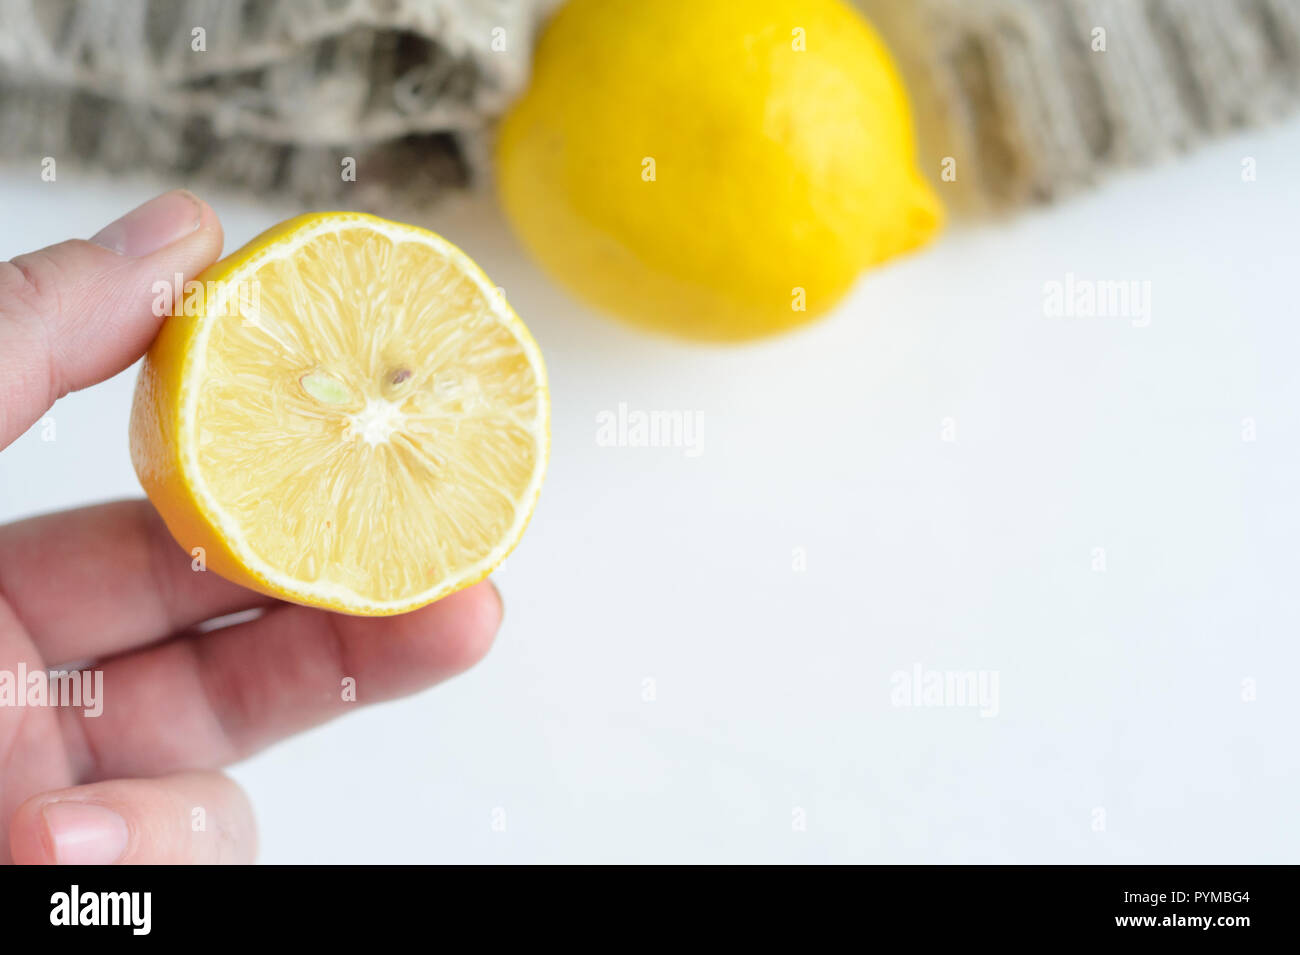 Hand holds half of lemon on a white wooden background. Stock Photo